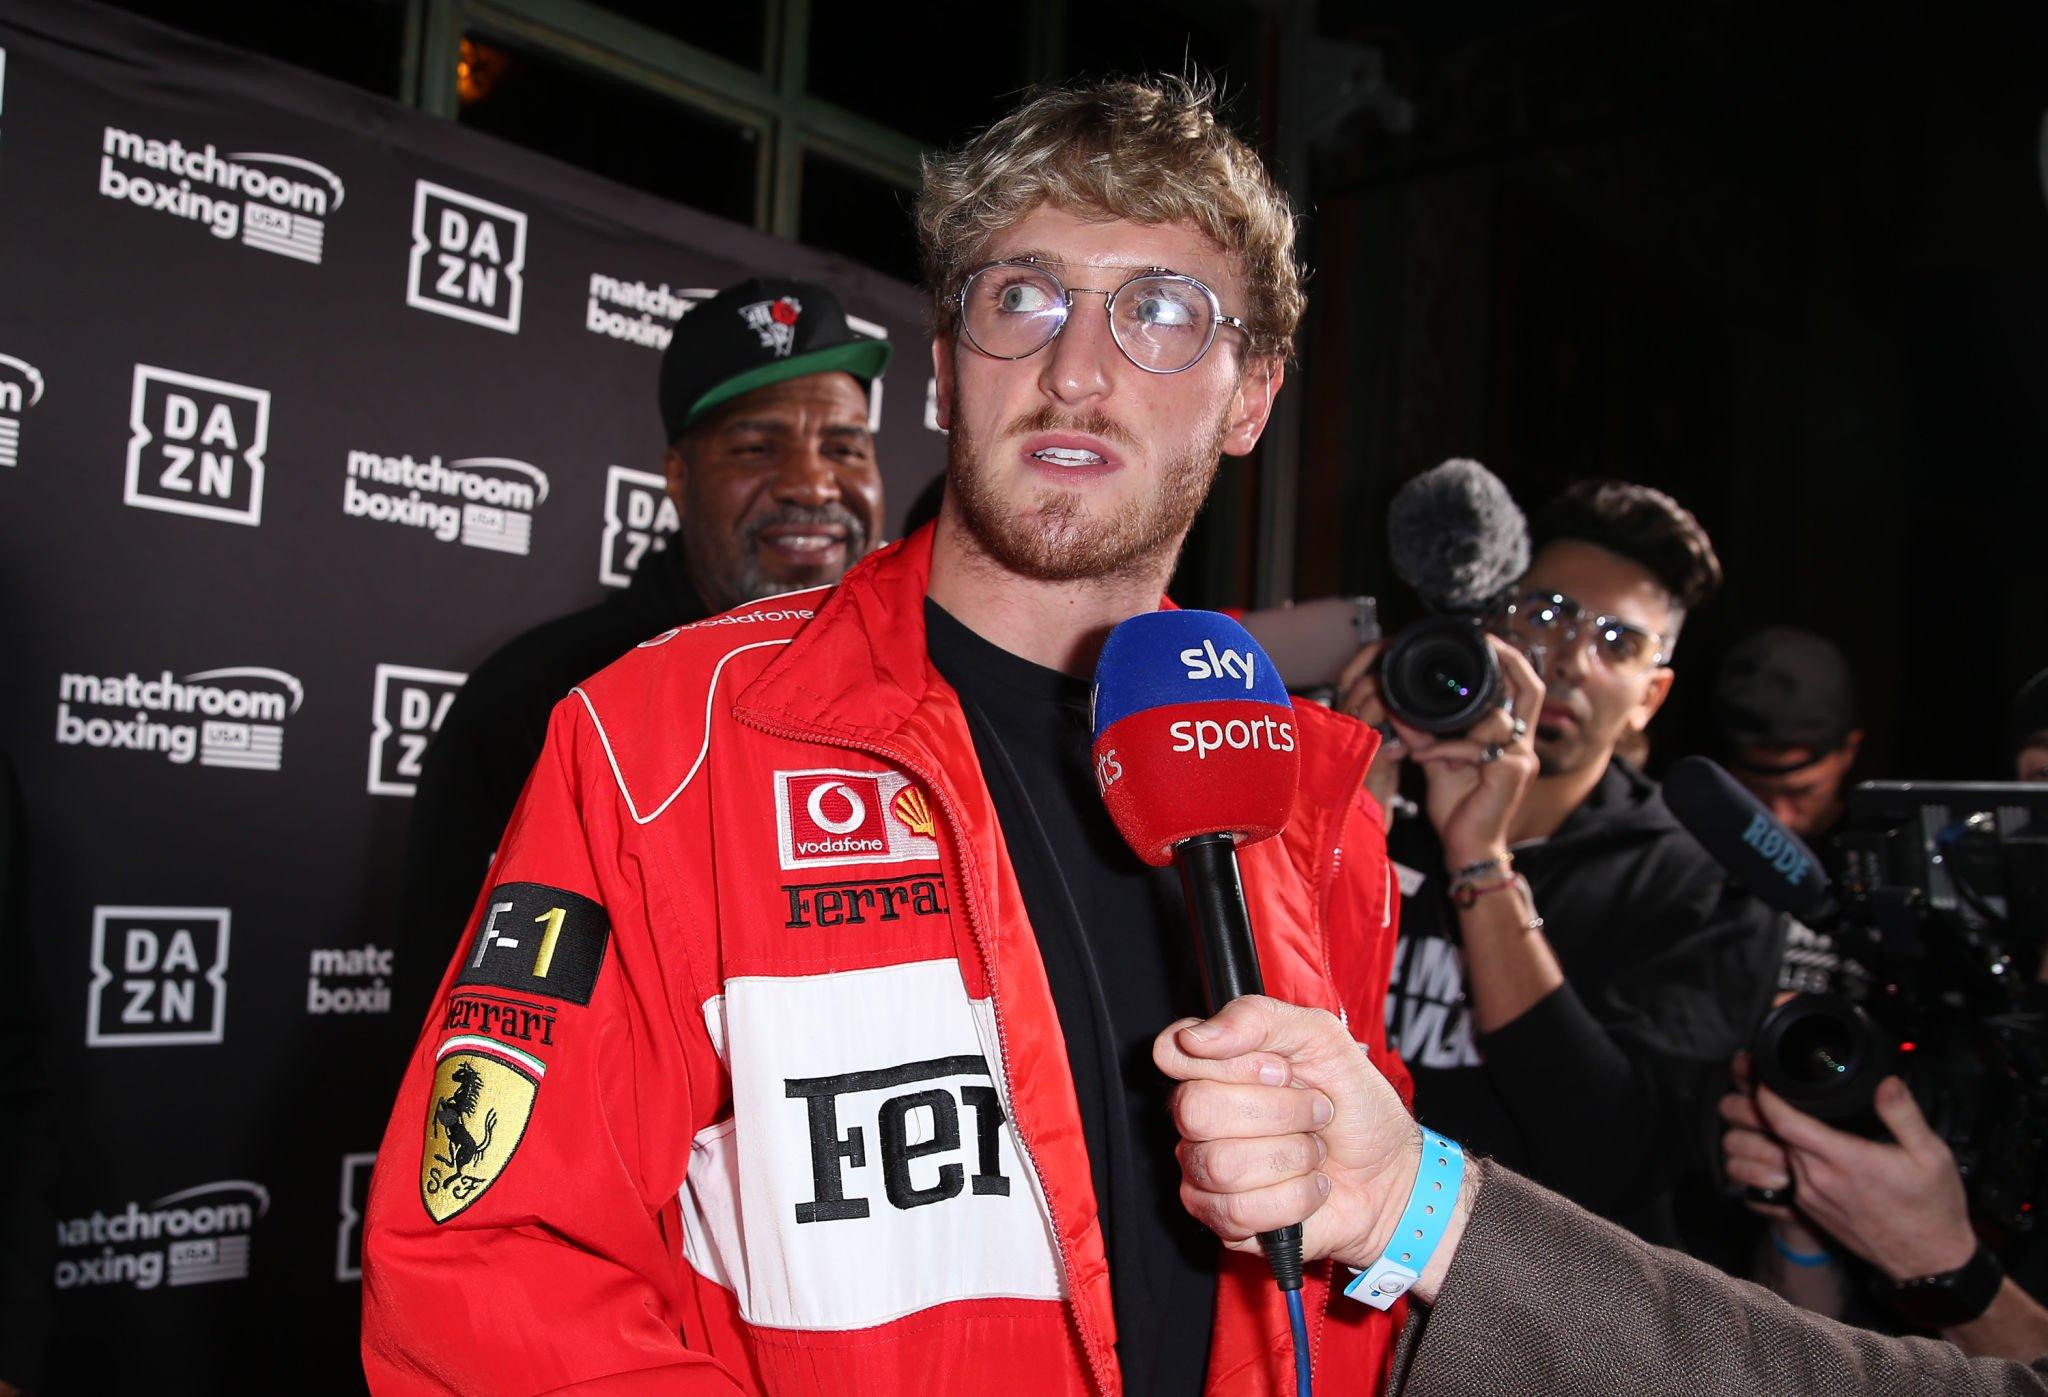 LOS ANGELES, CALIFORNIA - NOVEMBER 04: Logan Paul speaks to the media as he arrives for the screening of DAZN's "40 Days" at Belasco Theatre on November 04, 2019 in Los Angeles, California. Logan Paul is Disappointed with JiDion Hyping Up Dillon Danis